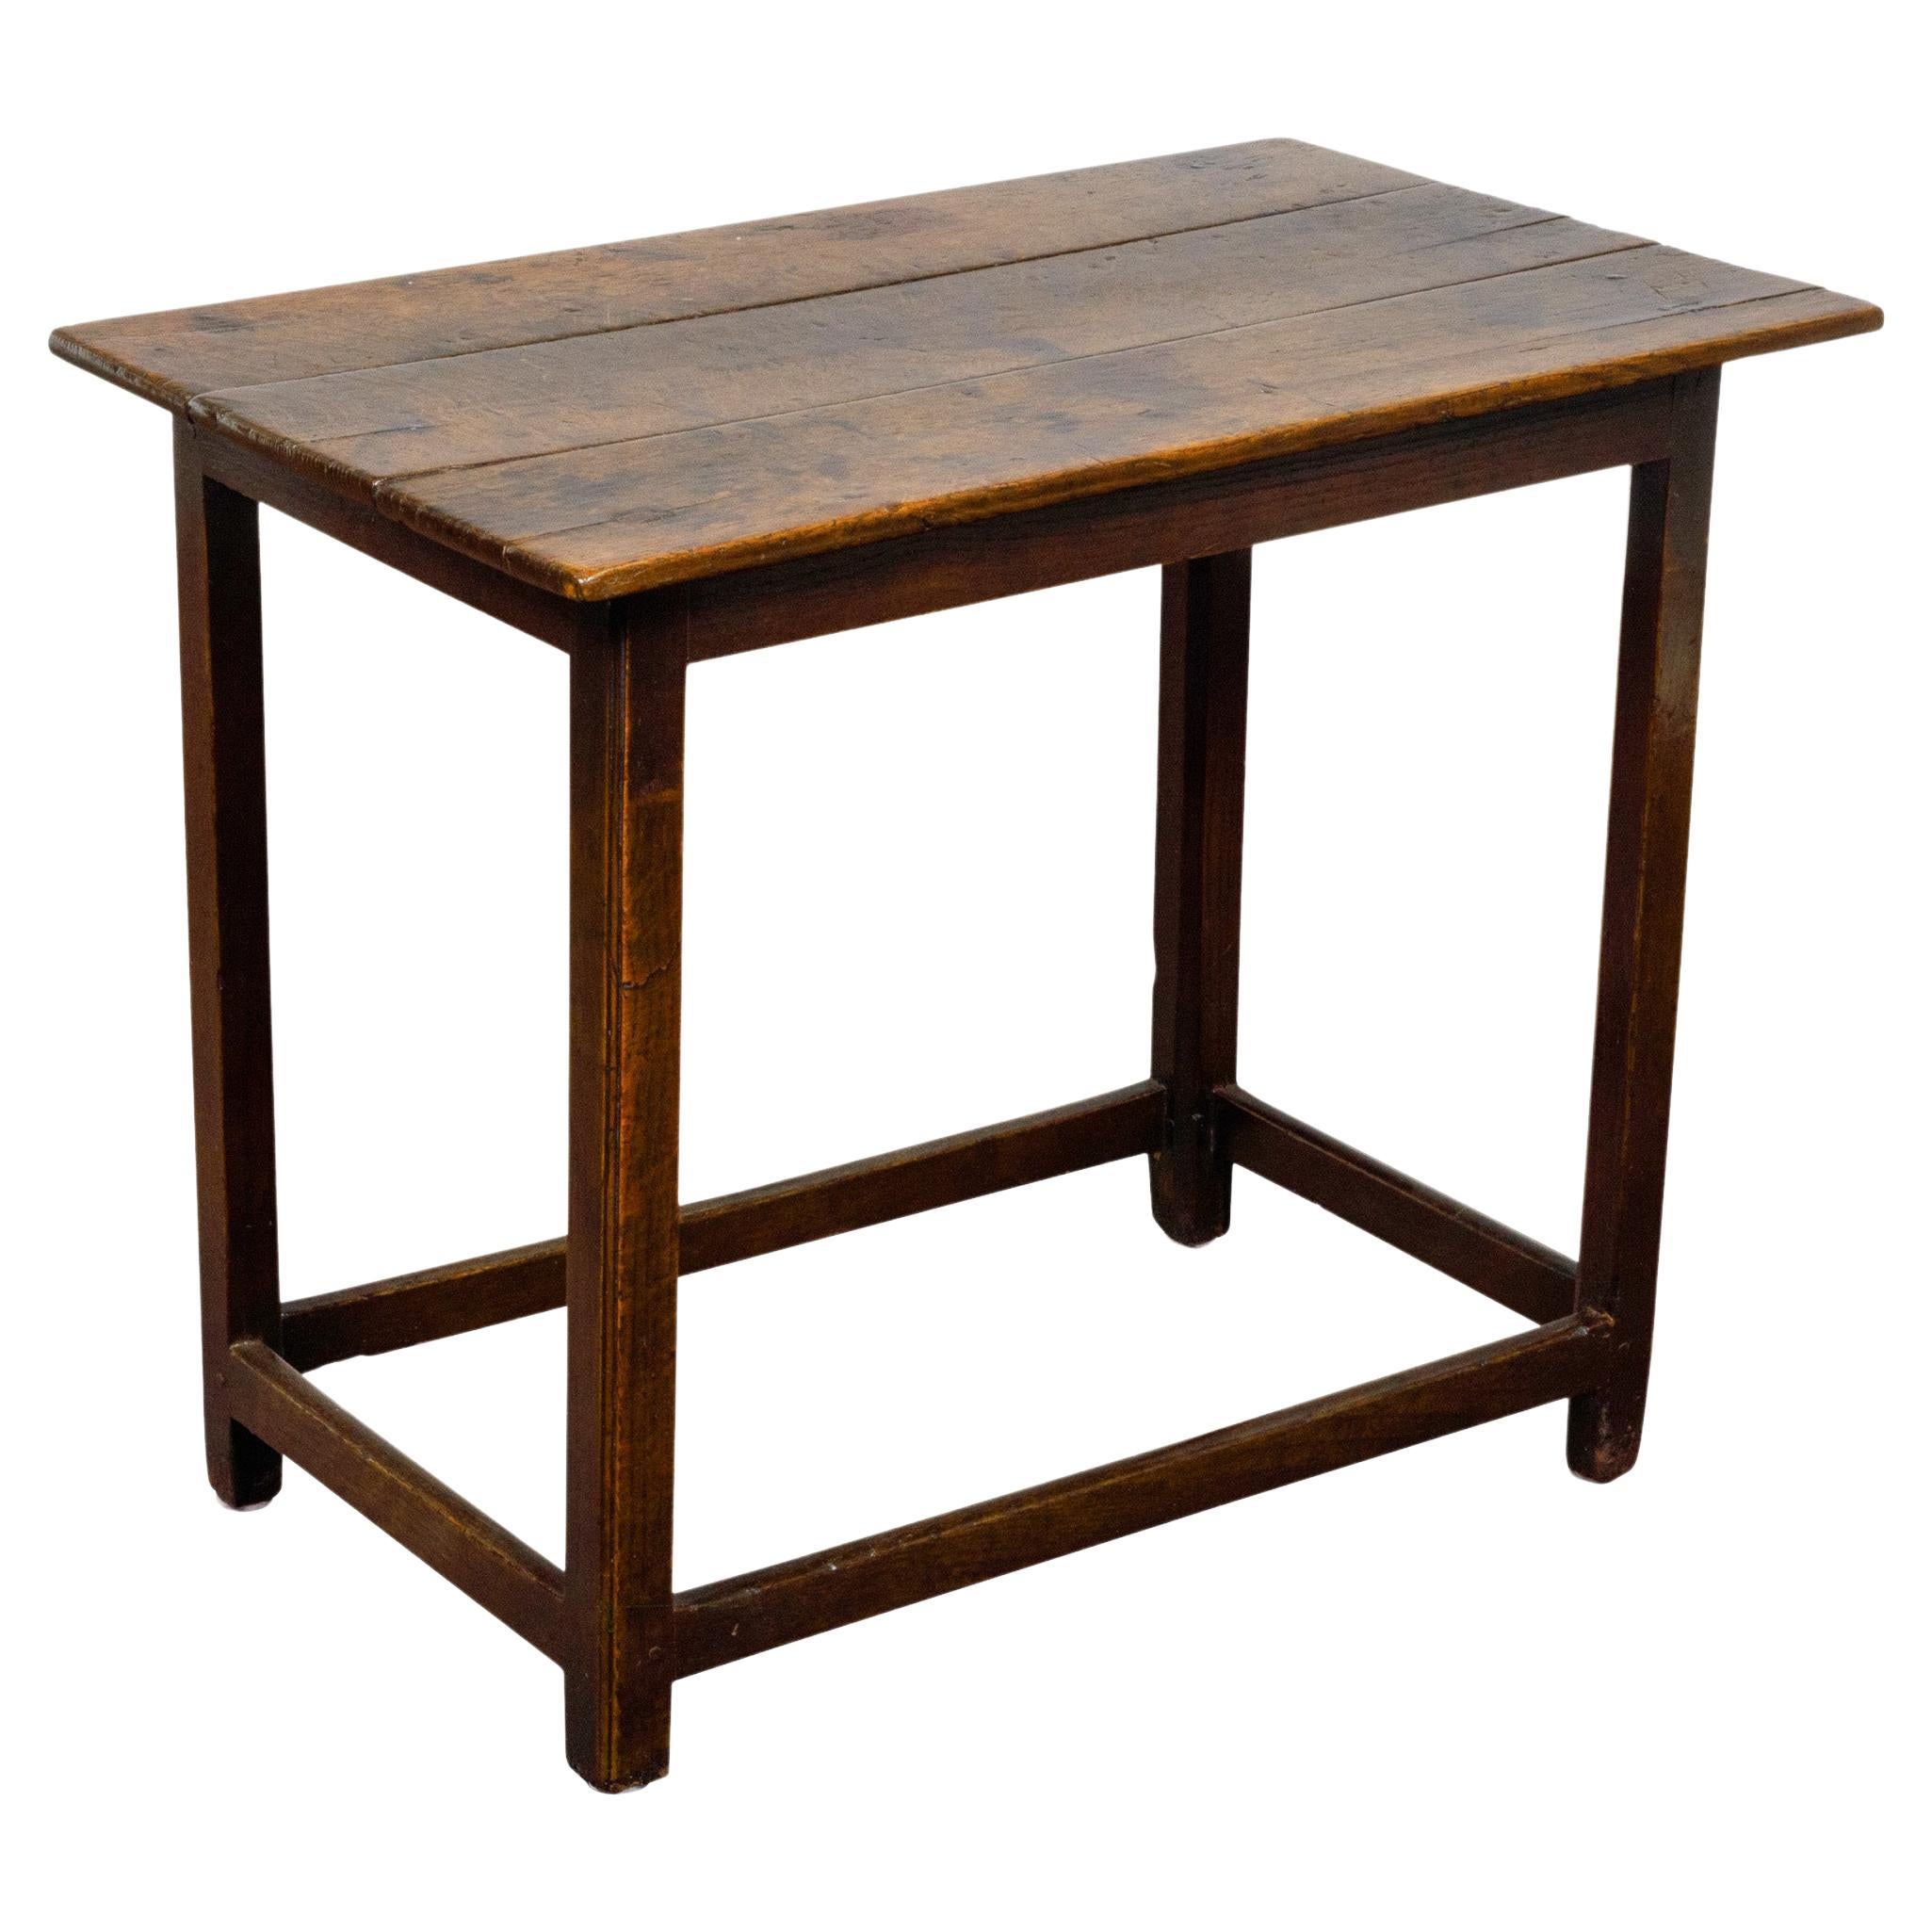 English Oak 1800s Side Table with Planked Top, Straight Legs and Stretchers